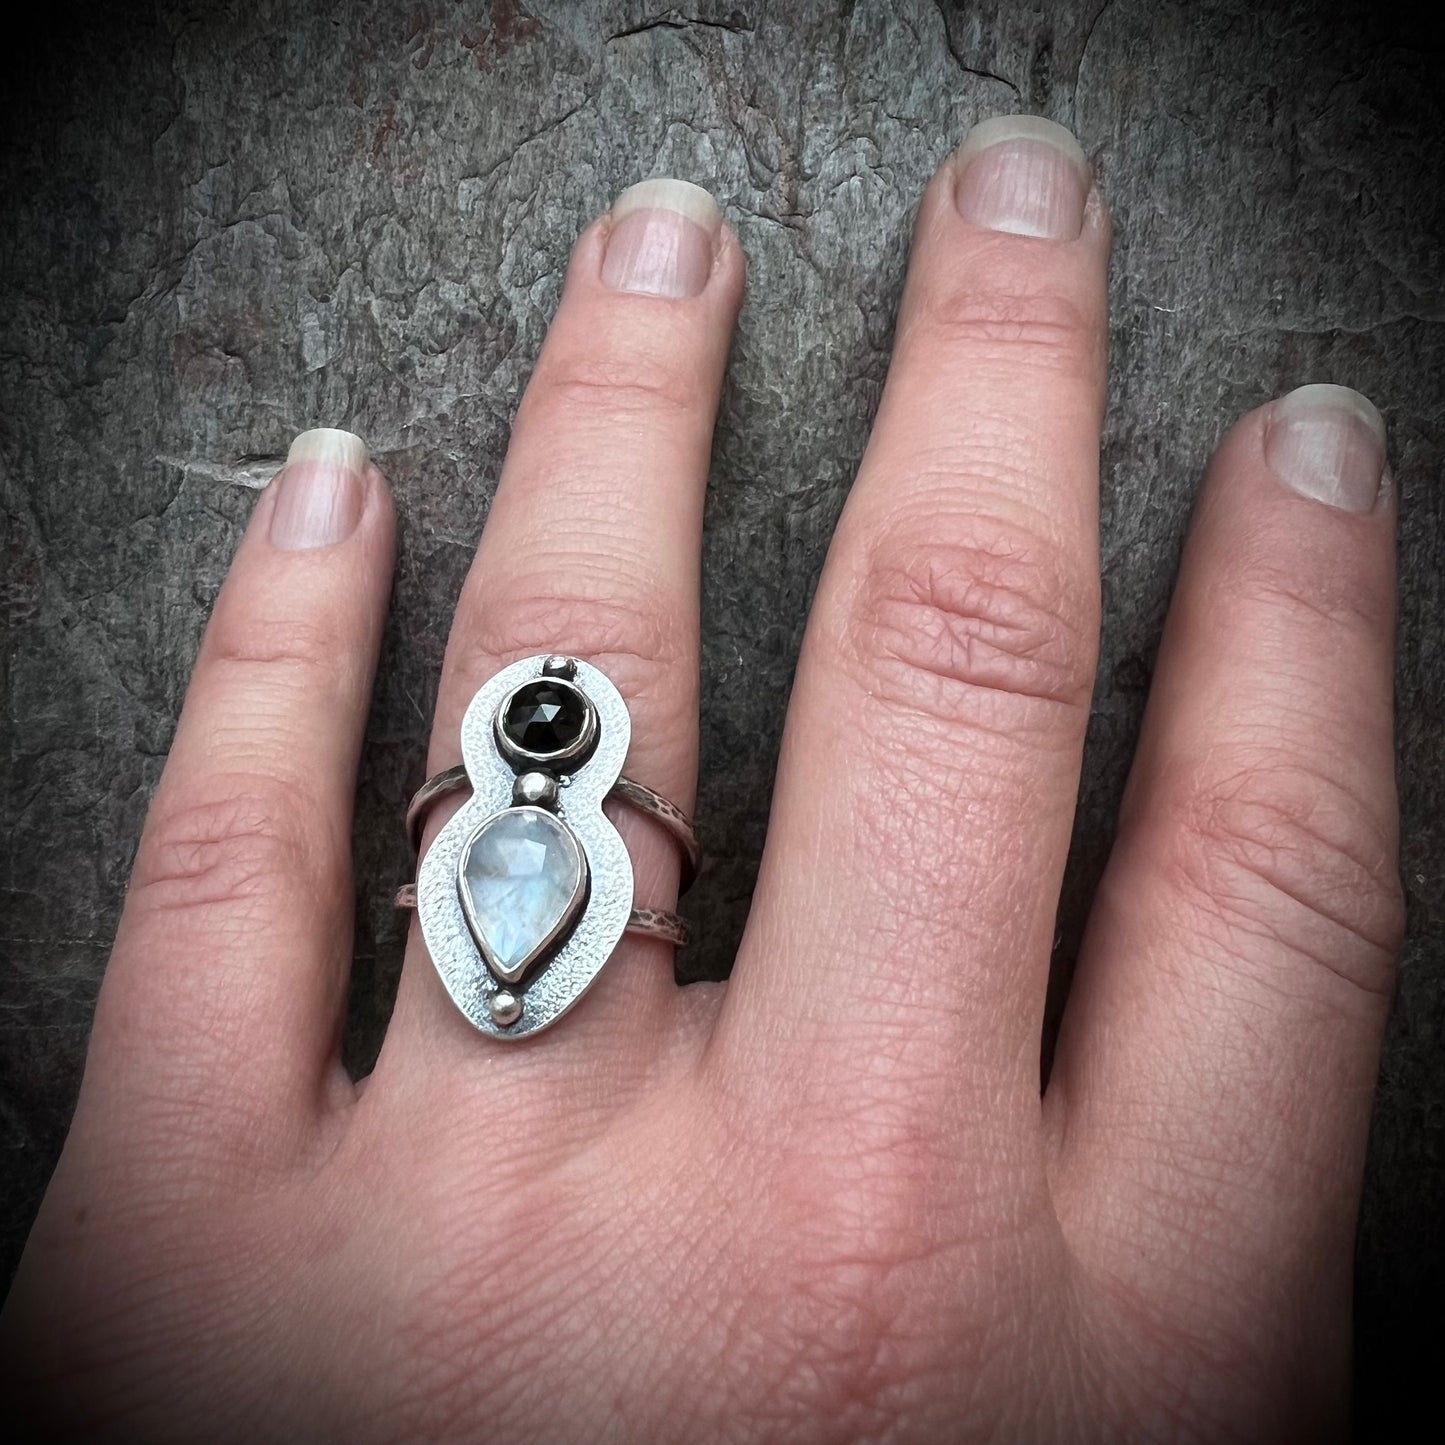 Rainbow Moonstone and Black Spinel Sterling Silver Ring - Handmade One-of-a-kind Ring - Size 8